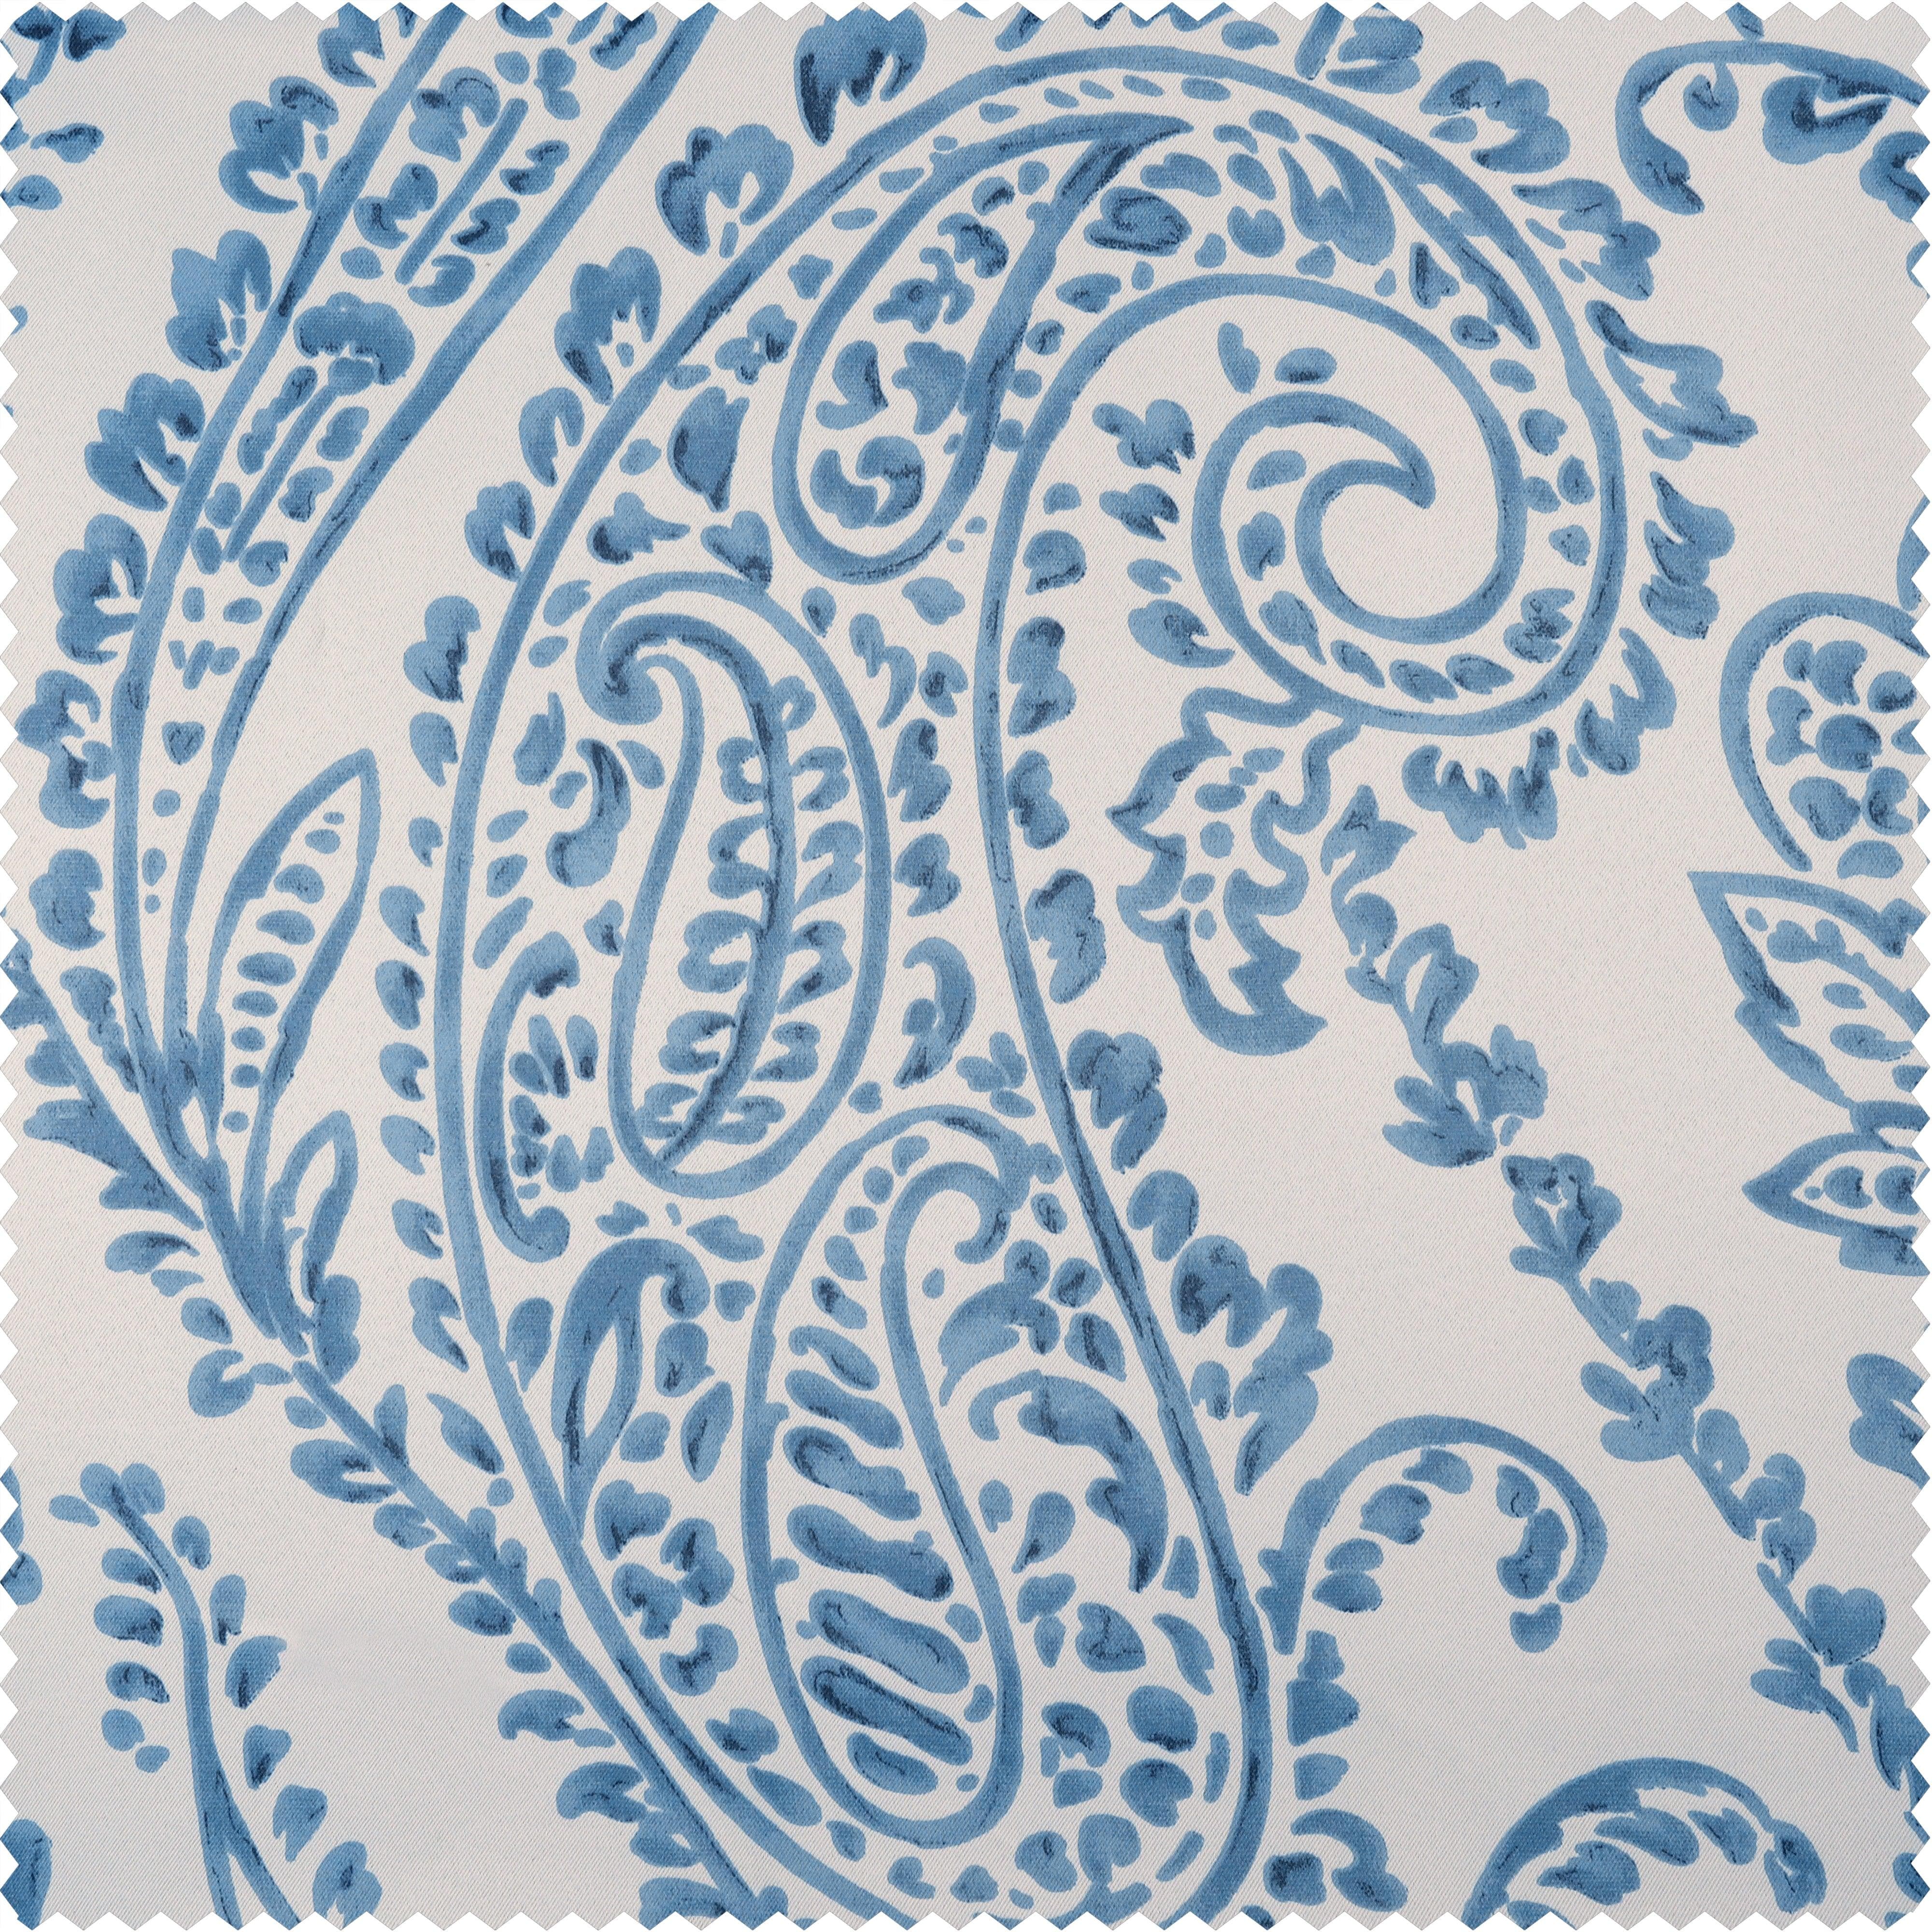 Tea Time China Blue Printed Polyester Swatch